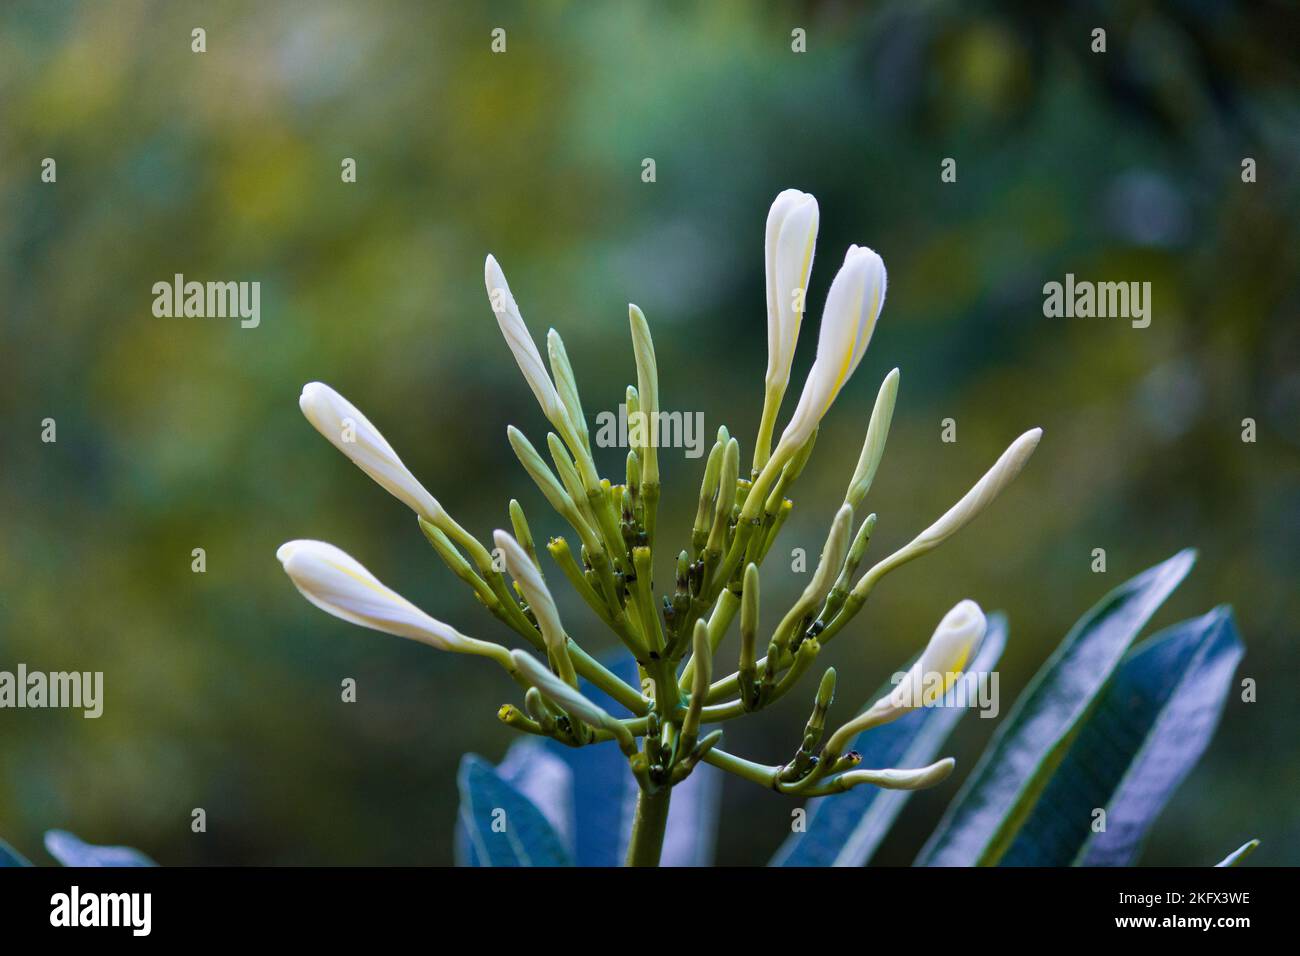 White flowers in full bloom in the garden on a bright sunny day Stock Photo